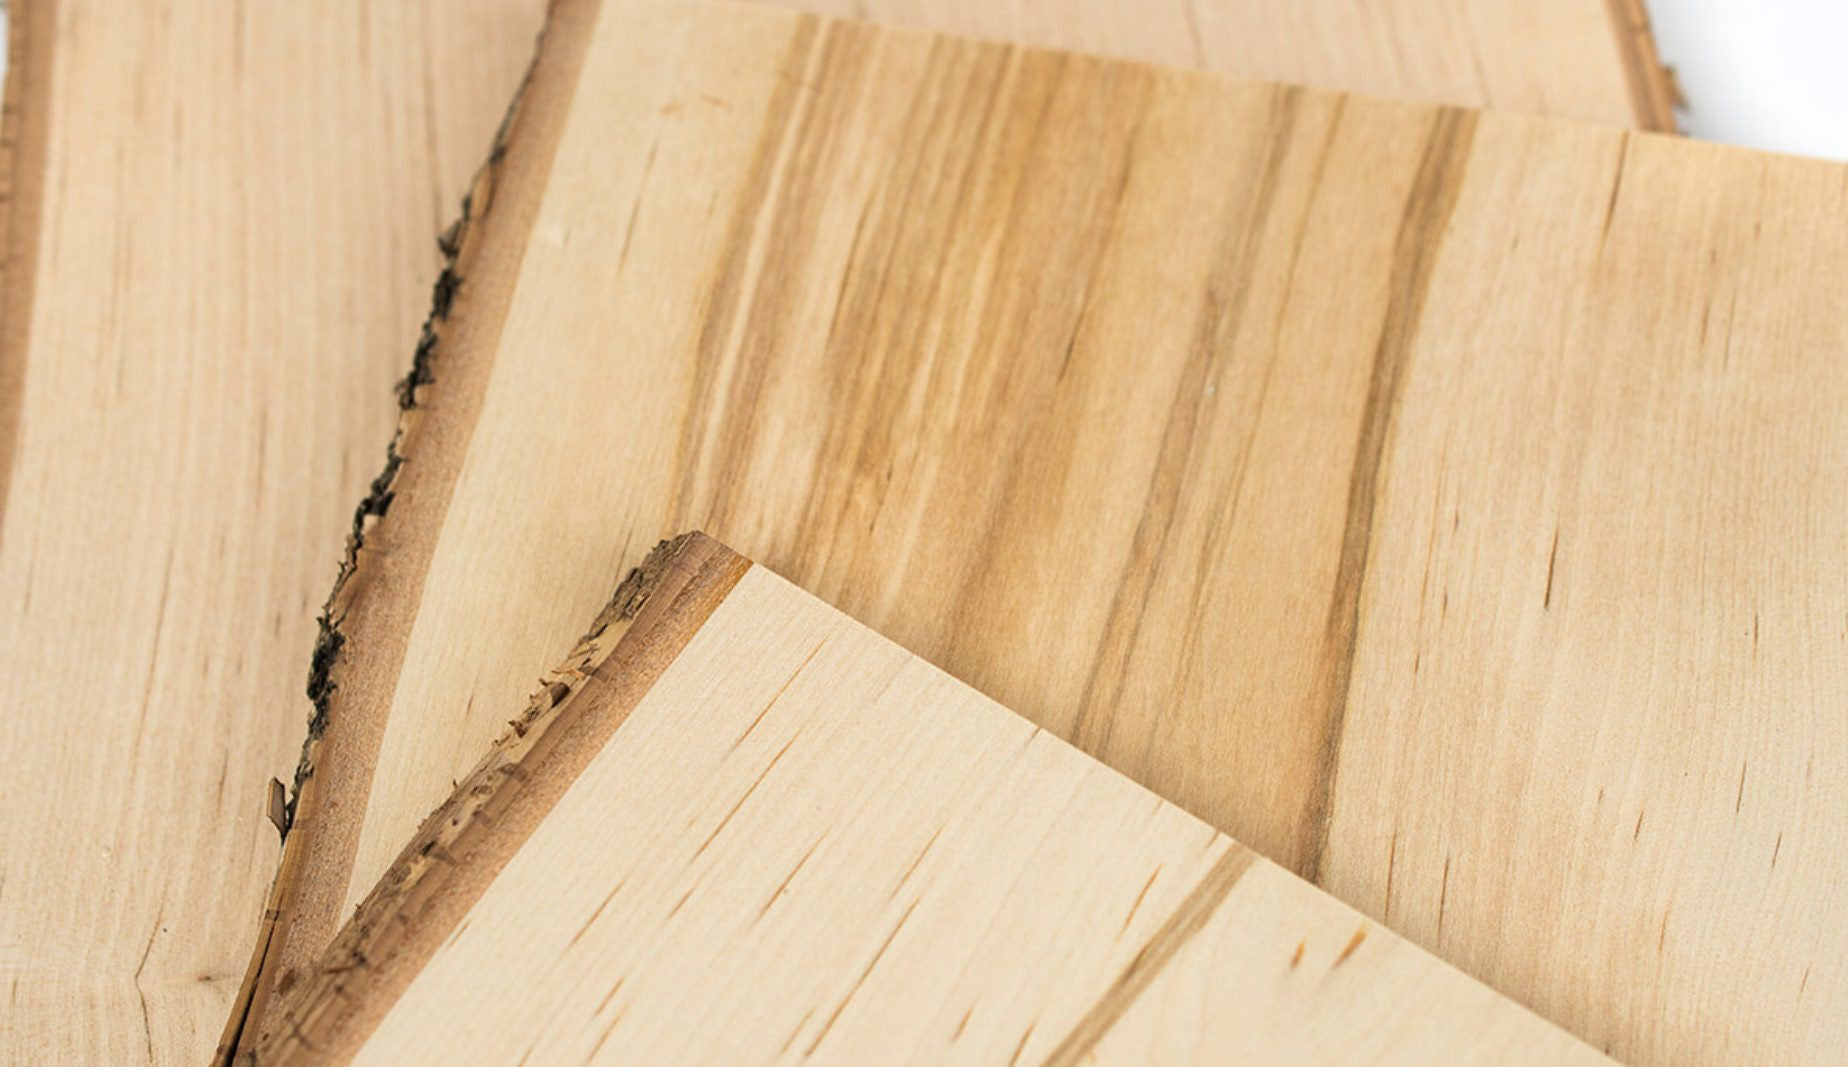 Birch wood used as building material